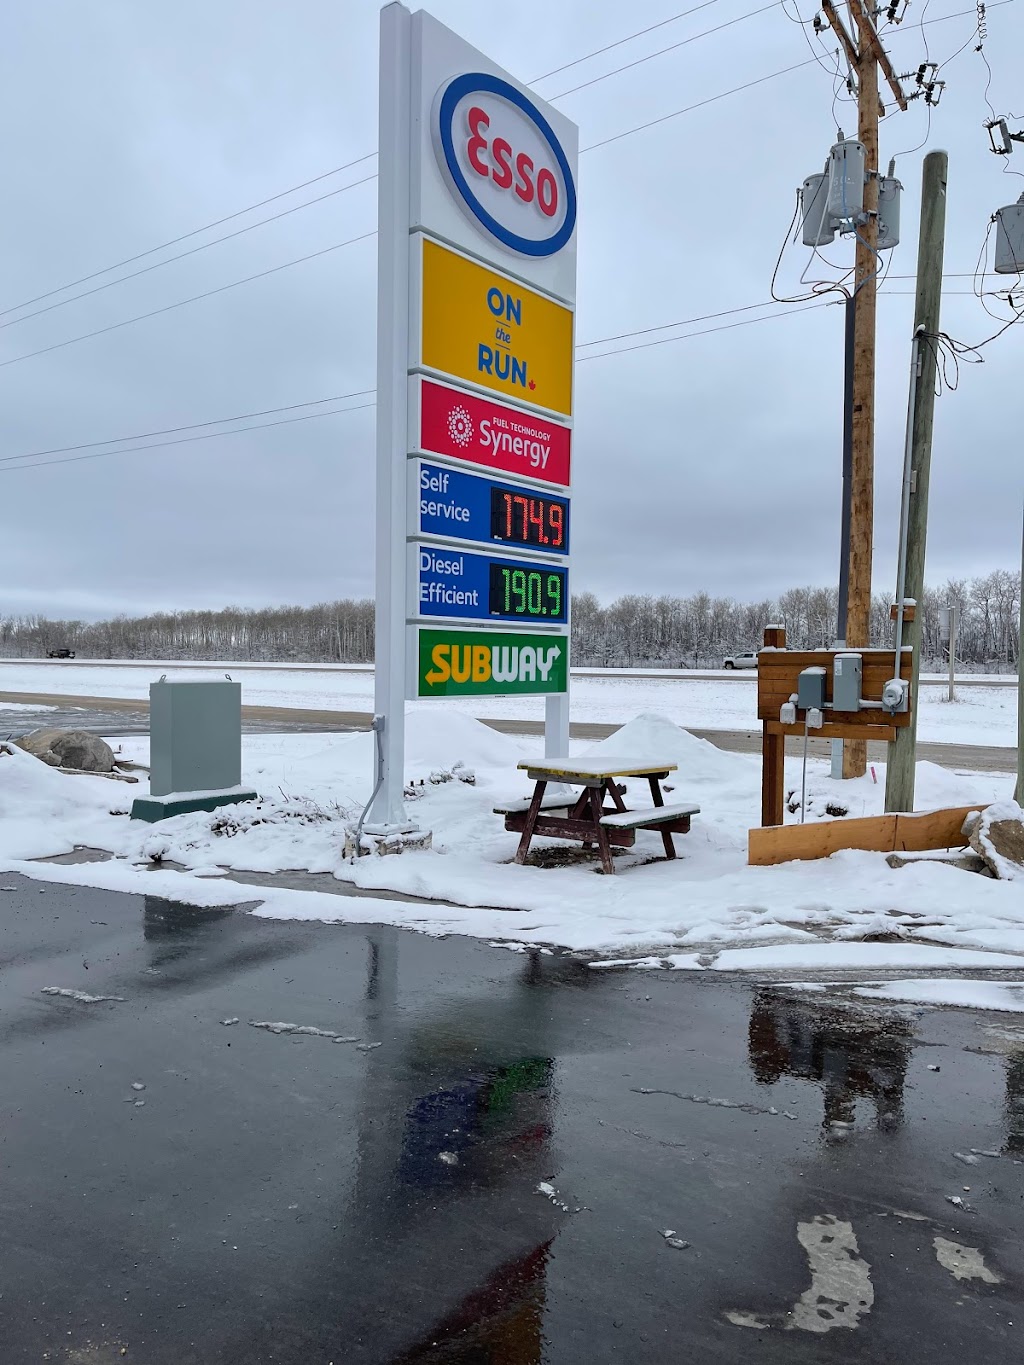 Esso | gas station | 43164 1 East Hwy, Richer, MB R0E 1S0, Canada | 4316990180 OR +1 431-699-0180